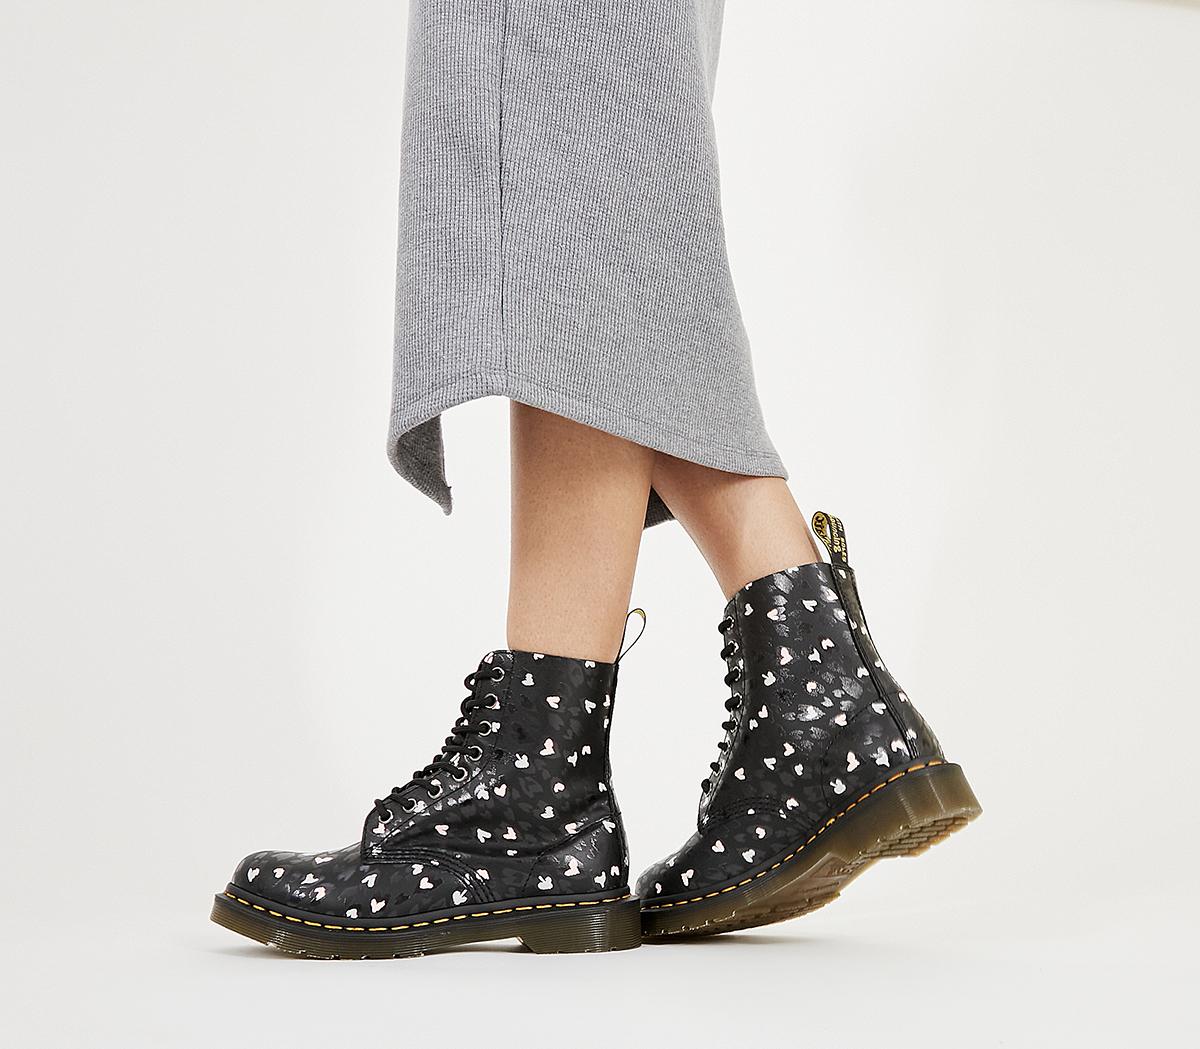 Dr. Martens8 Eyelet Lace Up Boots Black Hearts